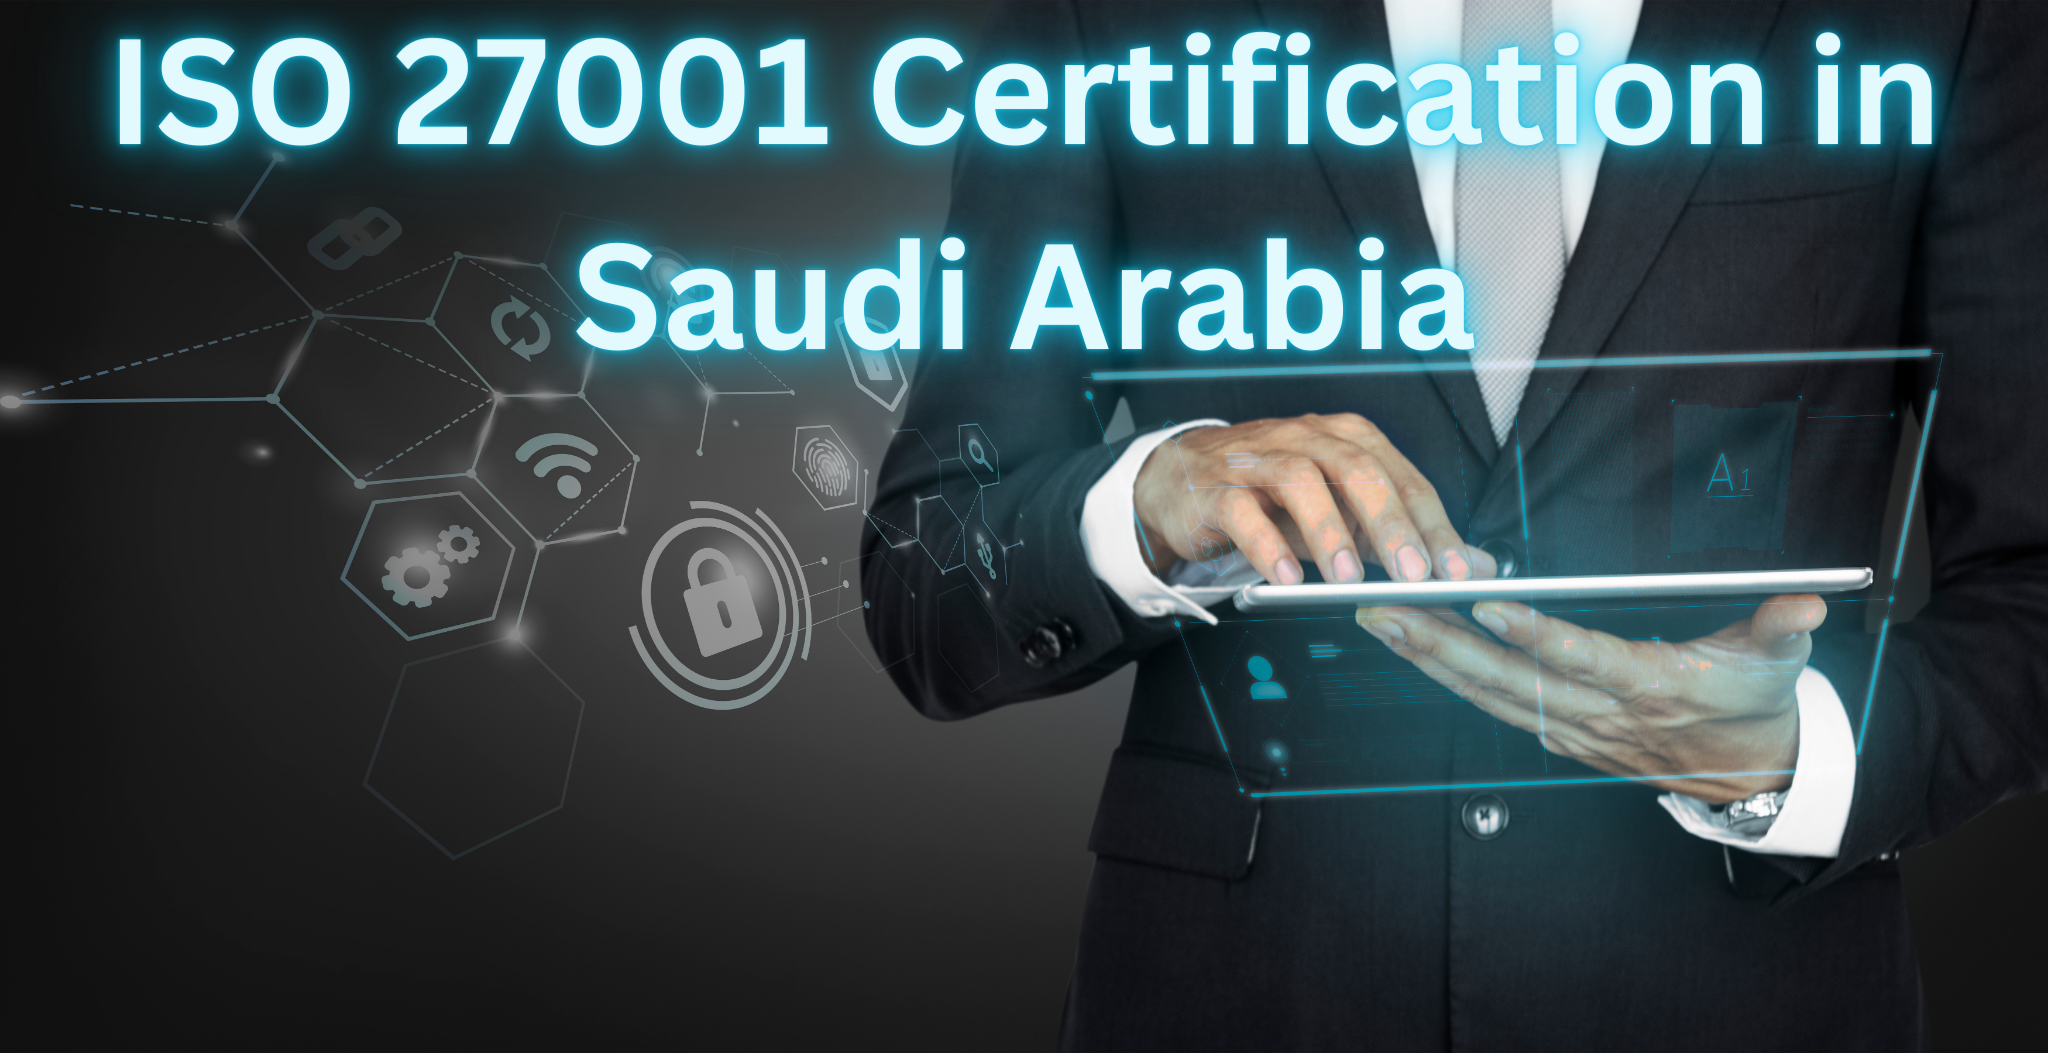 An overview of ISO 27001 Certification its benefits and requirements in